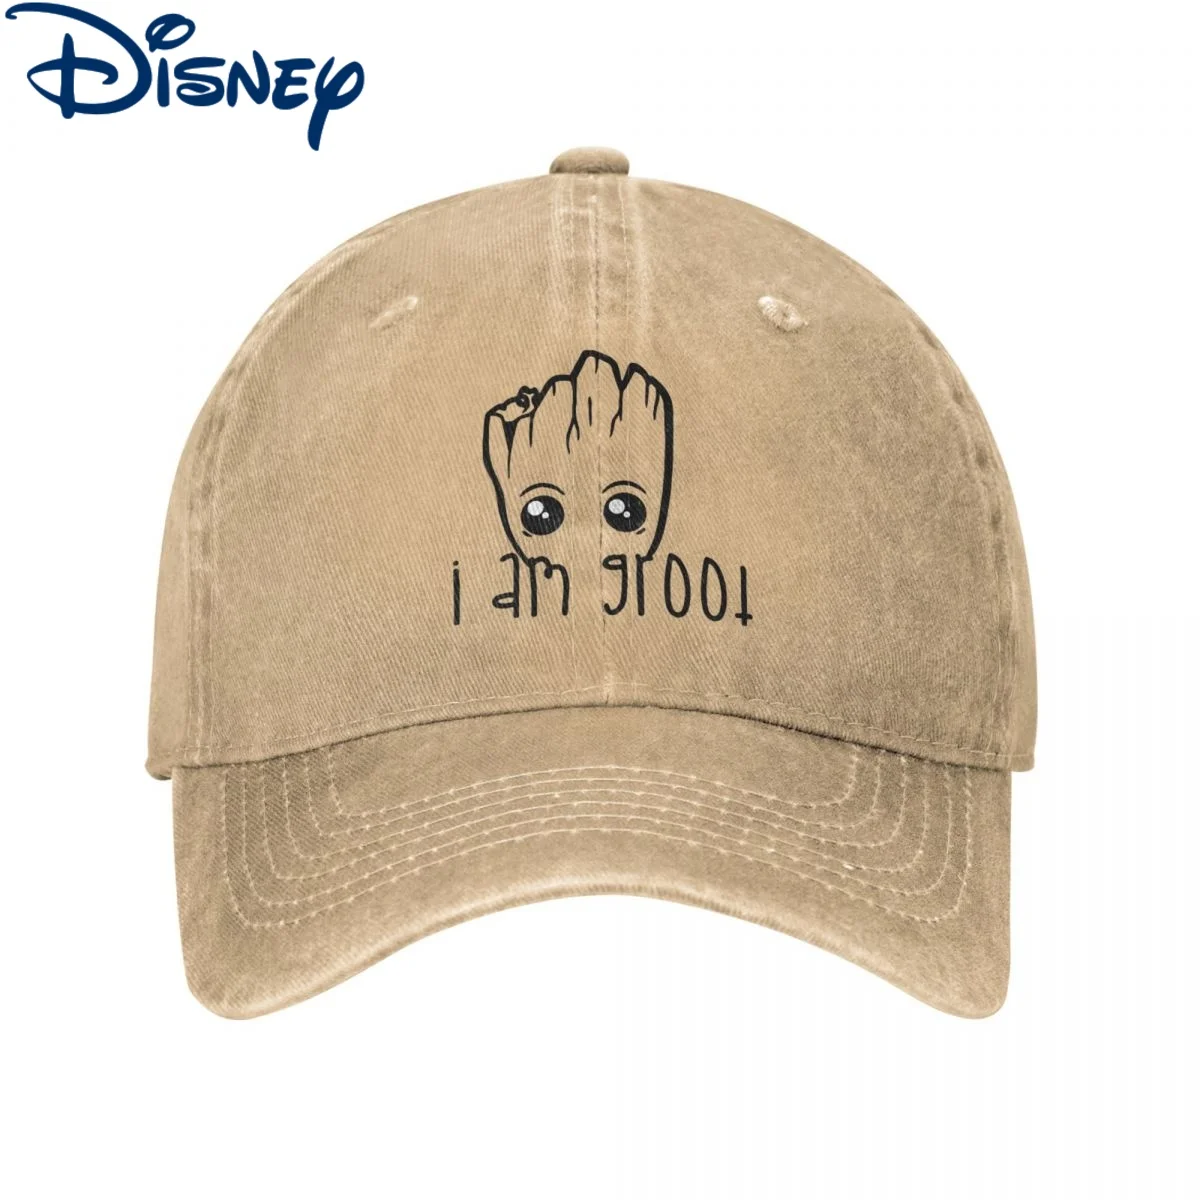 

Casual I Am Groot Baseball Caps Unisex Style Distressed Cotton Snapback Hat Marvel Avengers Outdoor Workouts Fit Hats Cap